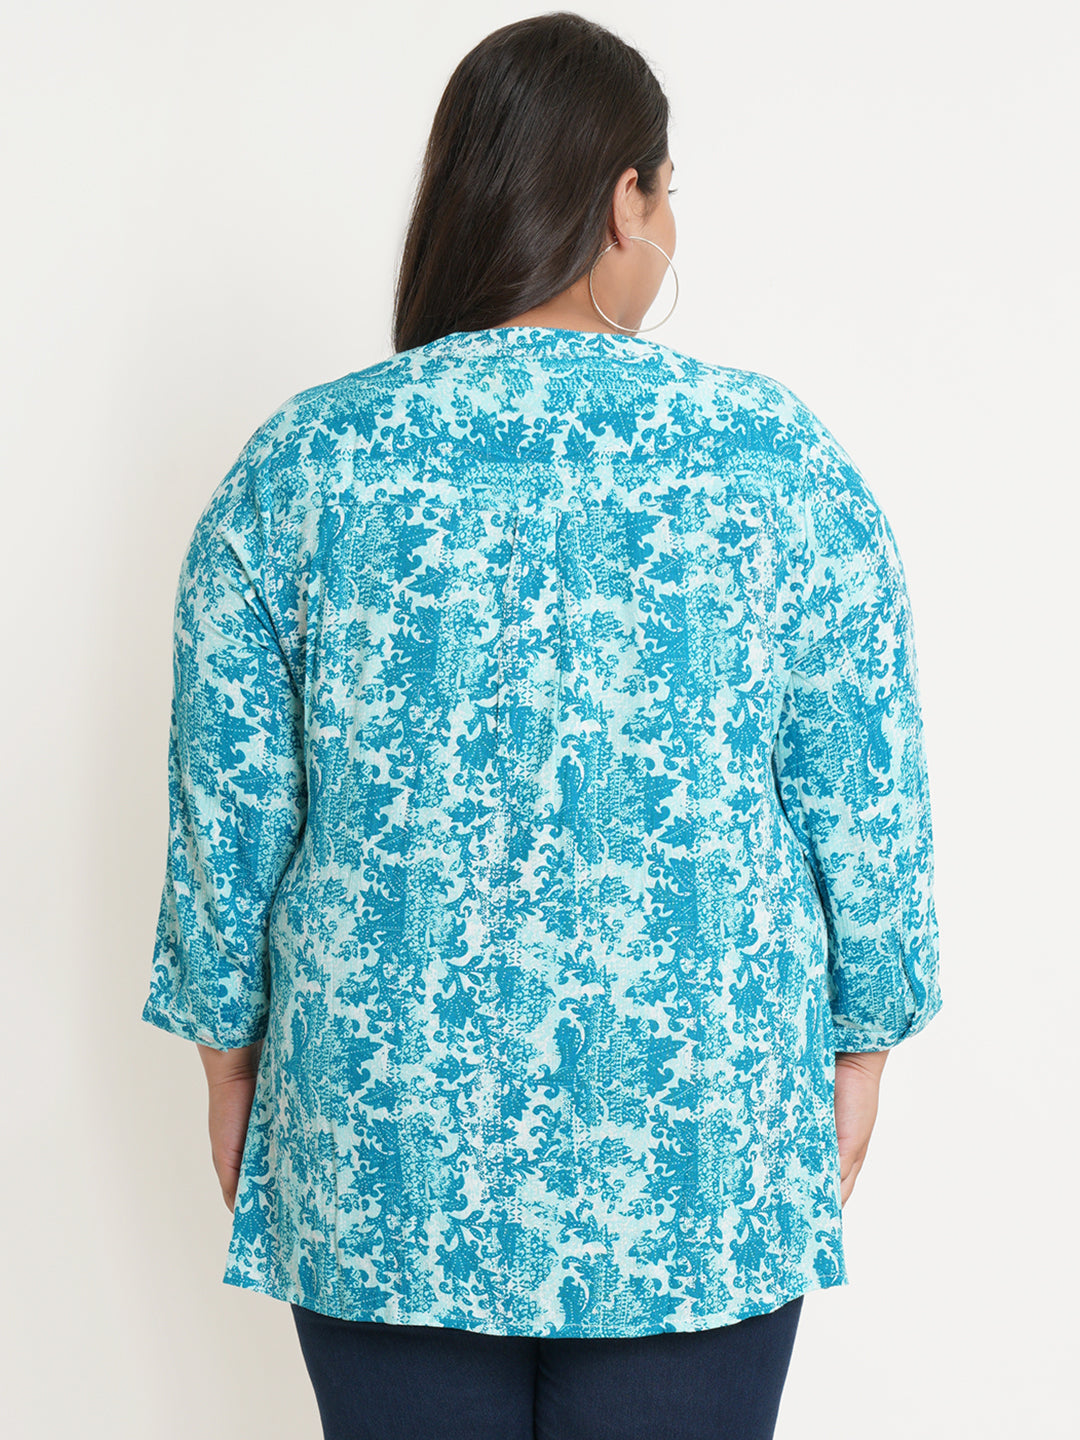 Women Turquoise Blue & White Abstract Printed Mandarin Collar Plus Size Top